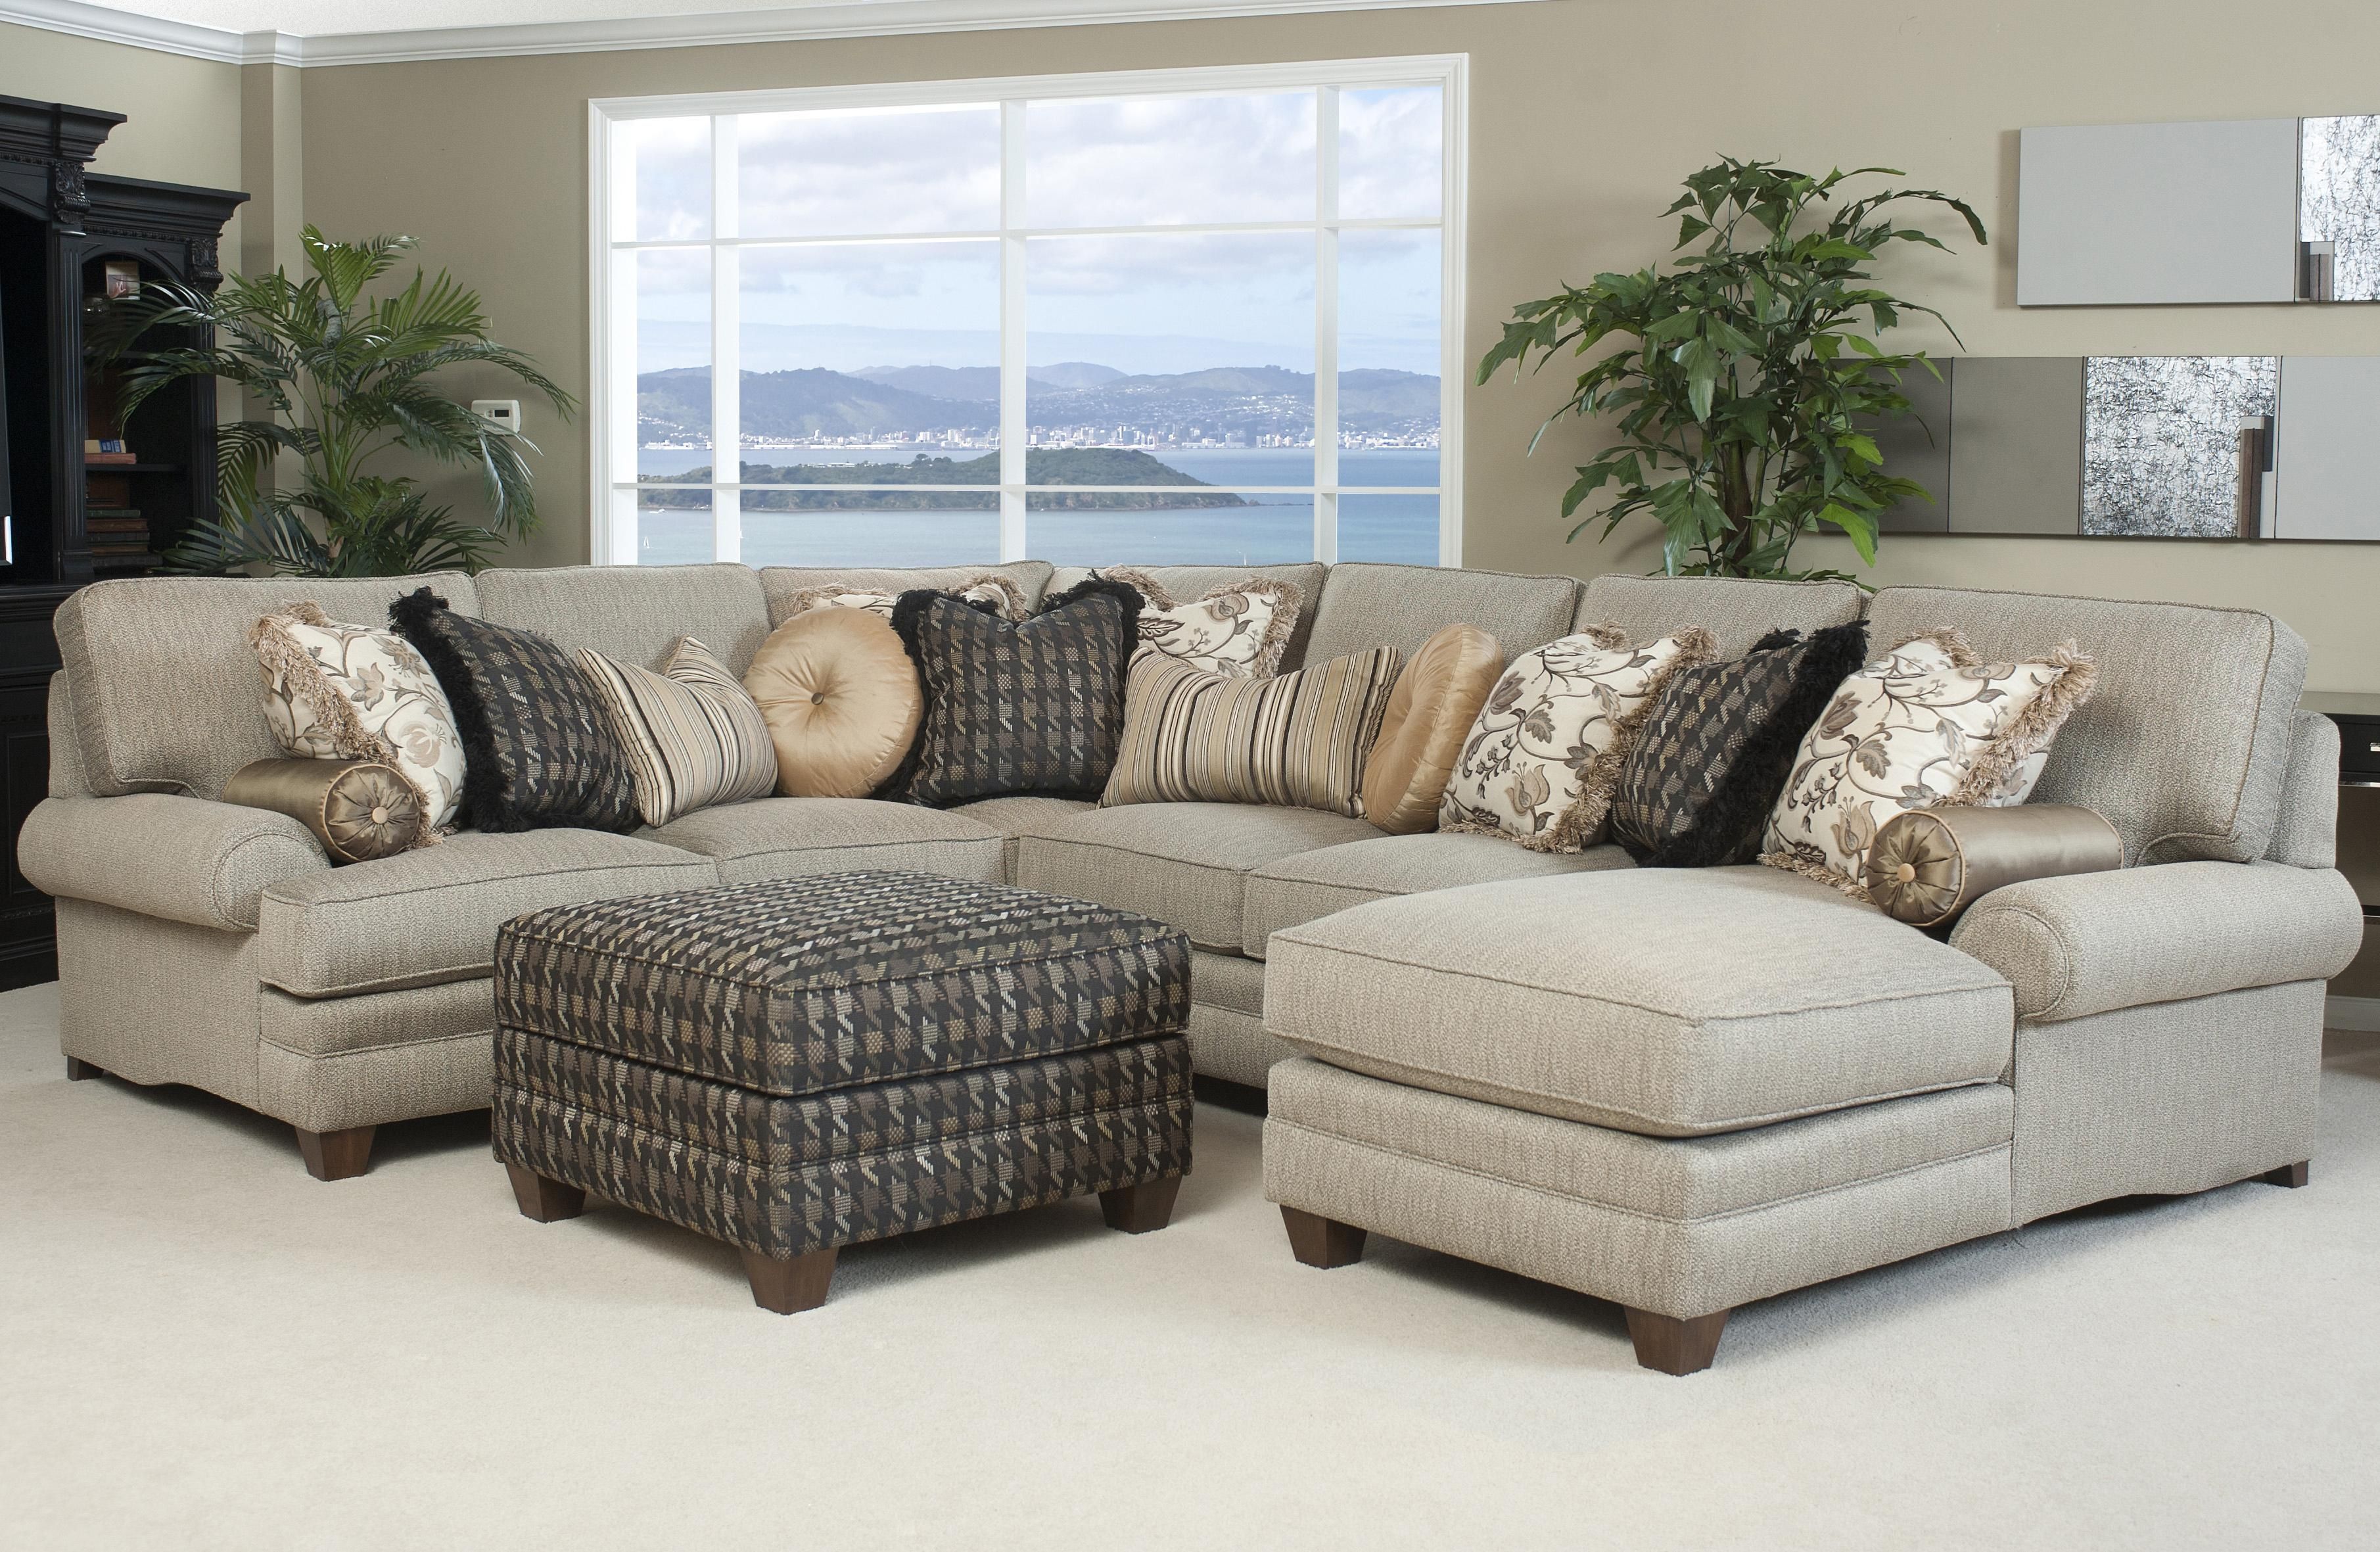 Traditional Styled Sectional Sofa With Comfortable Pillowed Seat Regarding Comfortable Sectional Sofa (Photo 1 of 15)